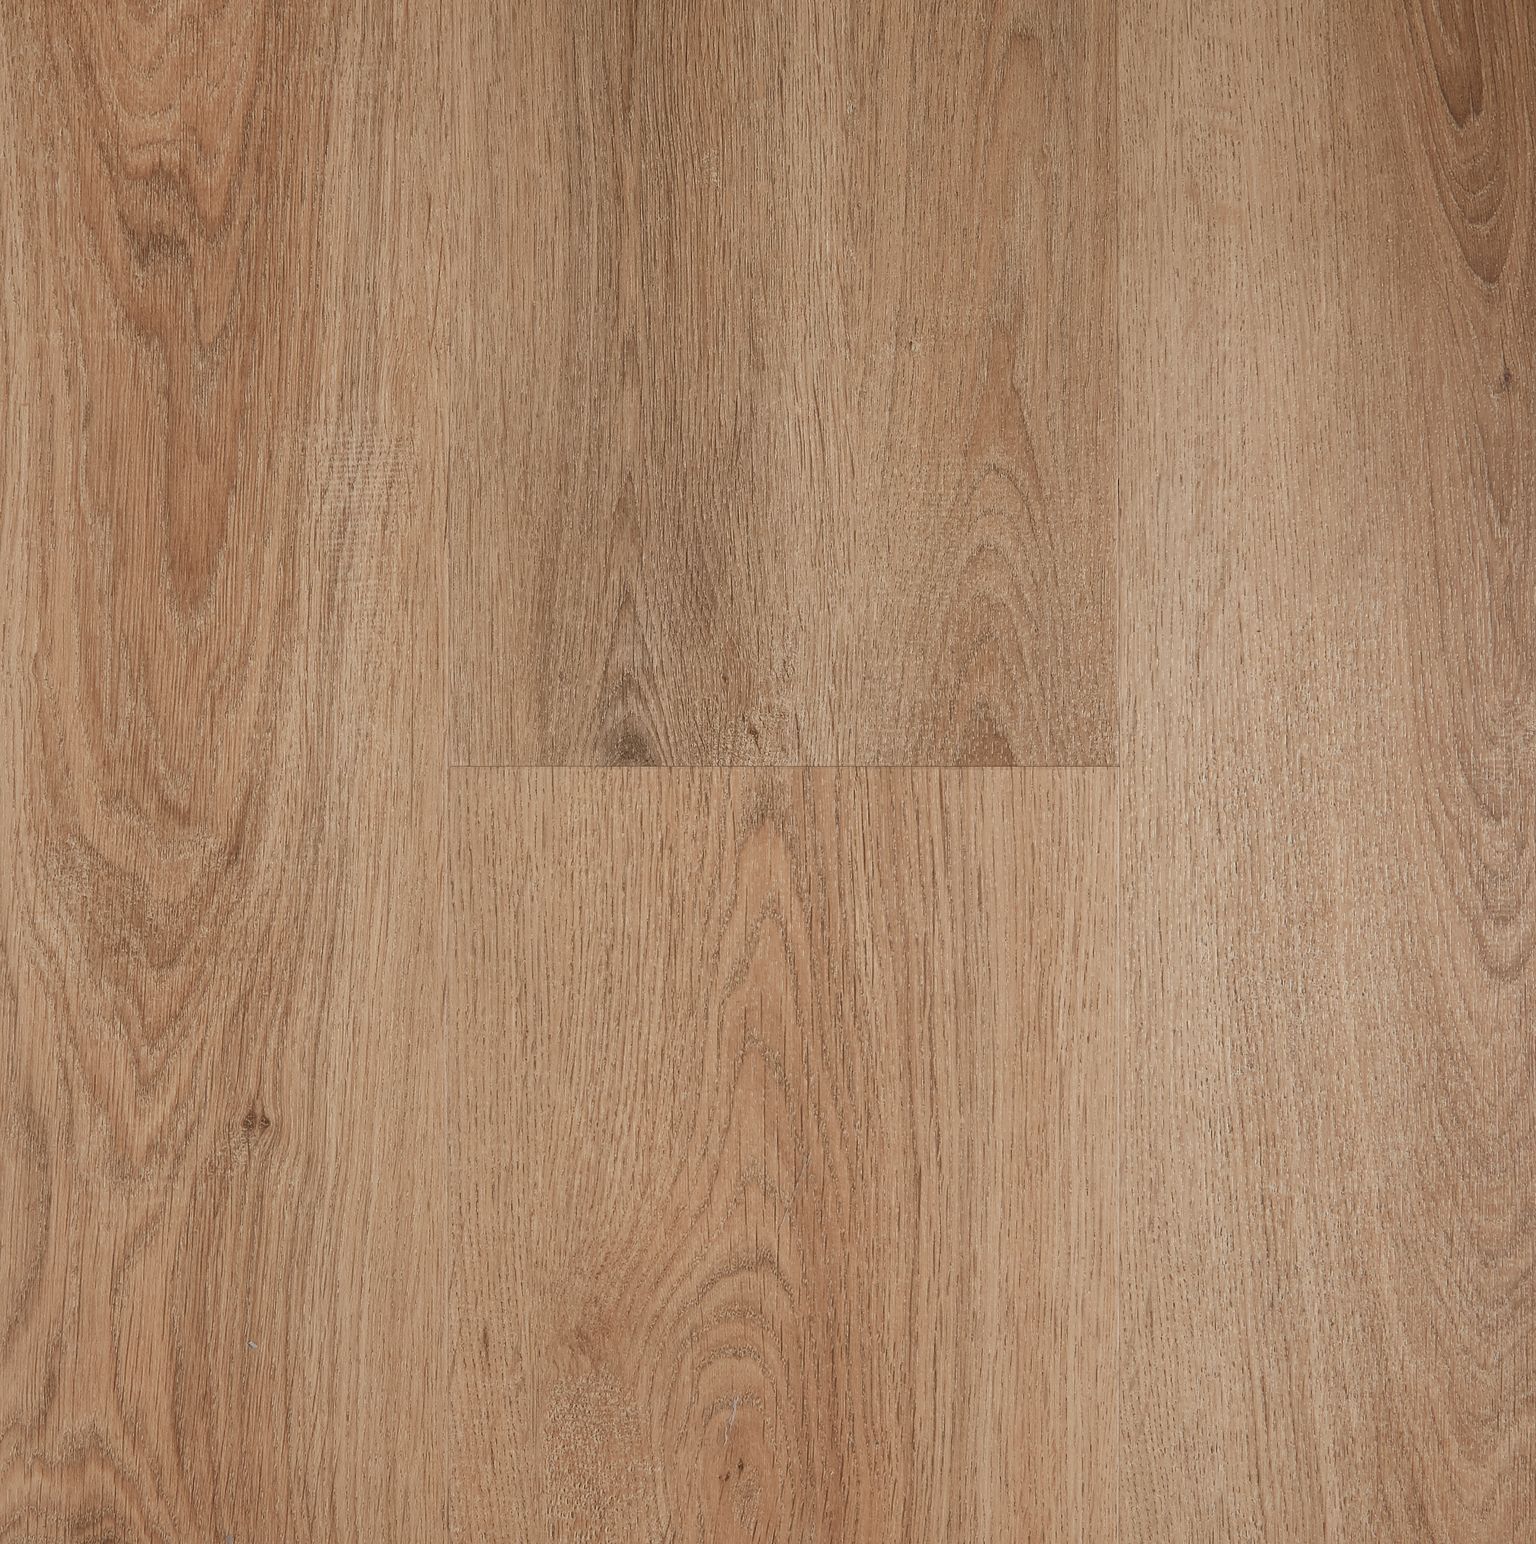 Easi Plank Washed Coral Hybrid Flooring 1520mm X 228mm X 6 5mm 2 08m2 Per Pack Flooring World